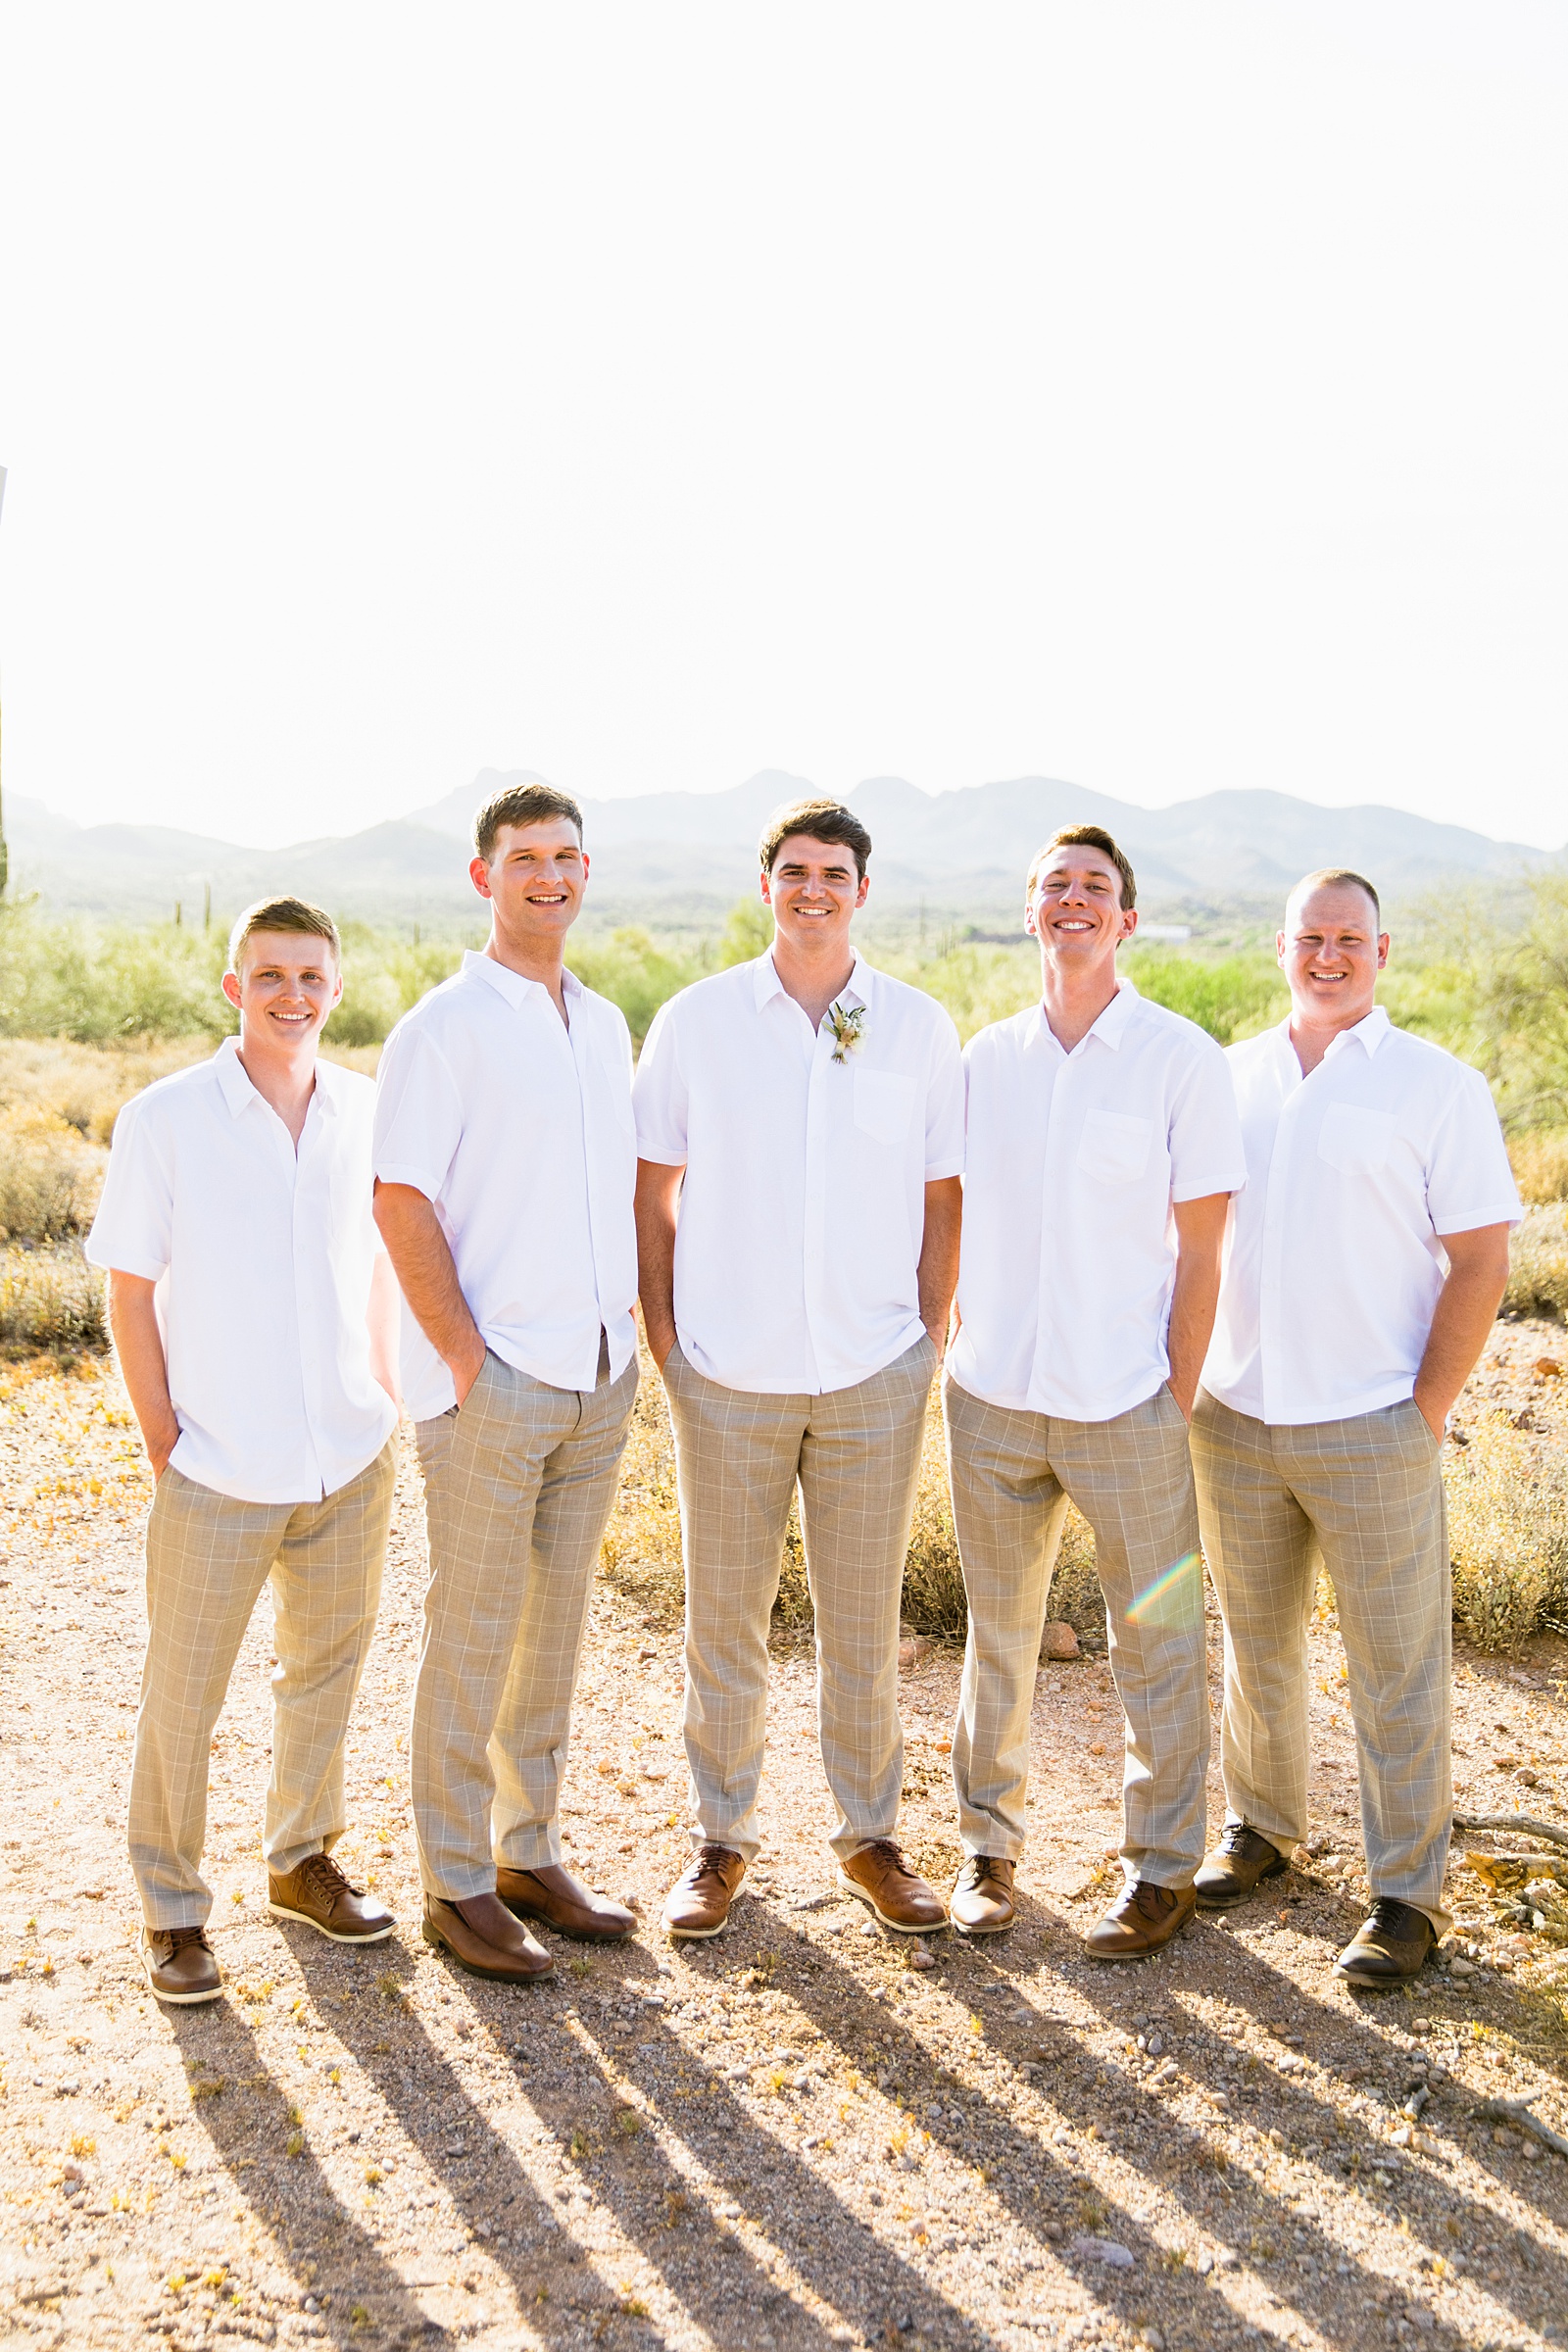 Groom and groomsmen together at a Superstition Mountain Micro wedding by Arizona wedding photographer PMA Photography.